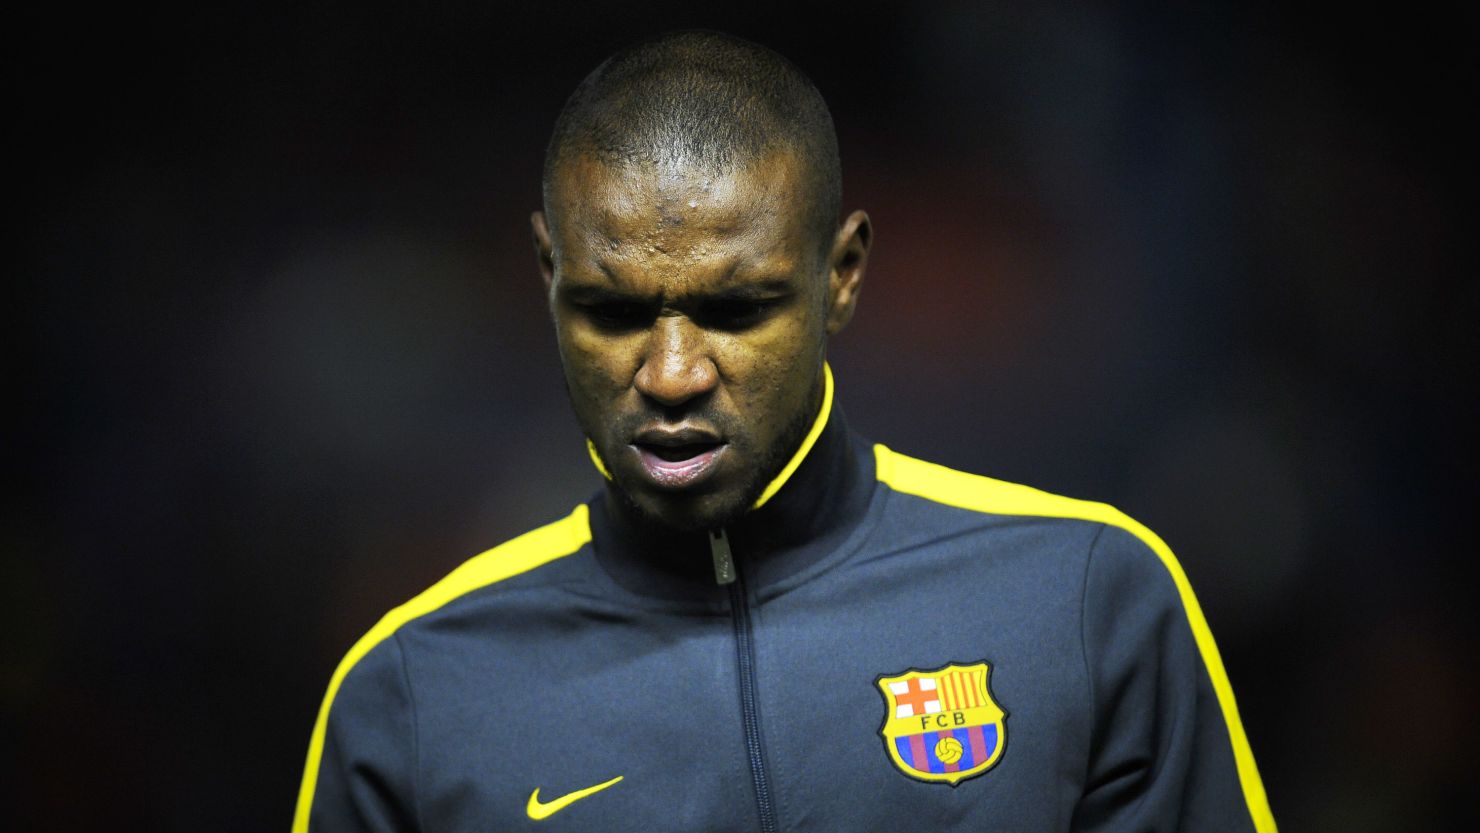 French defender Eric Abidal moved to Barcelona from Lyon in 2007.